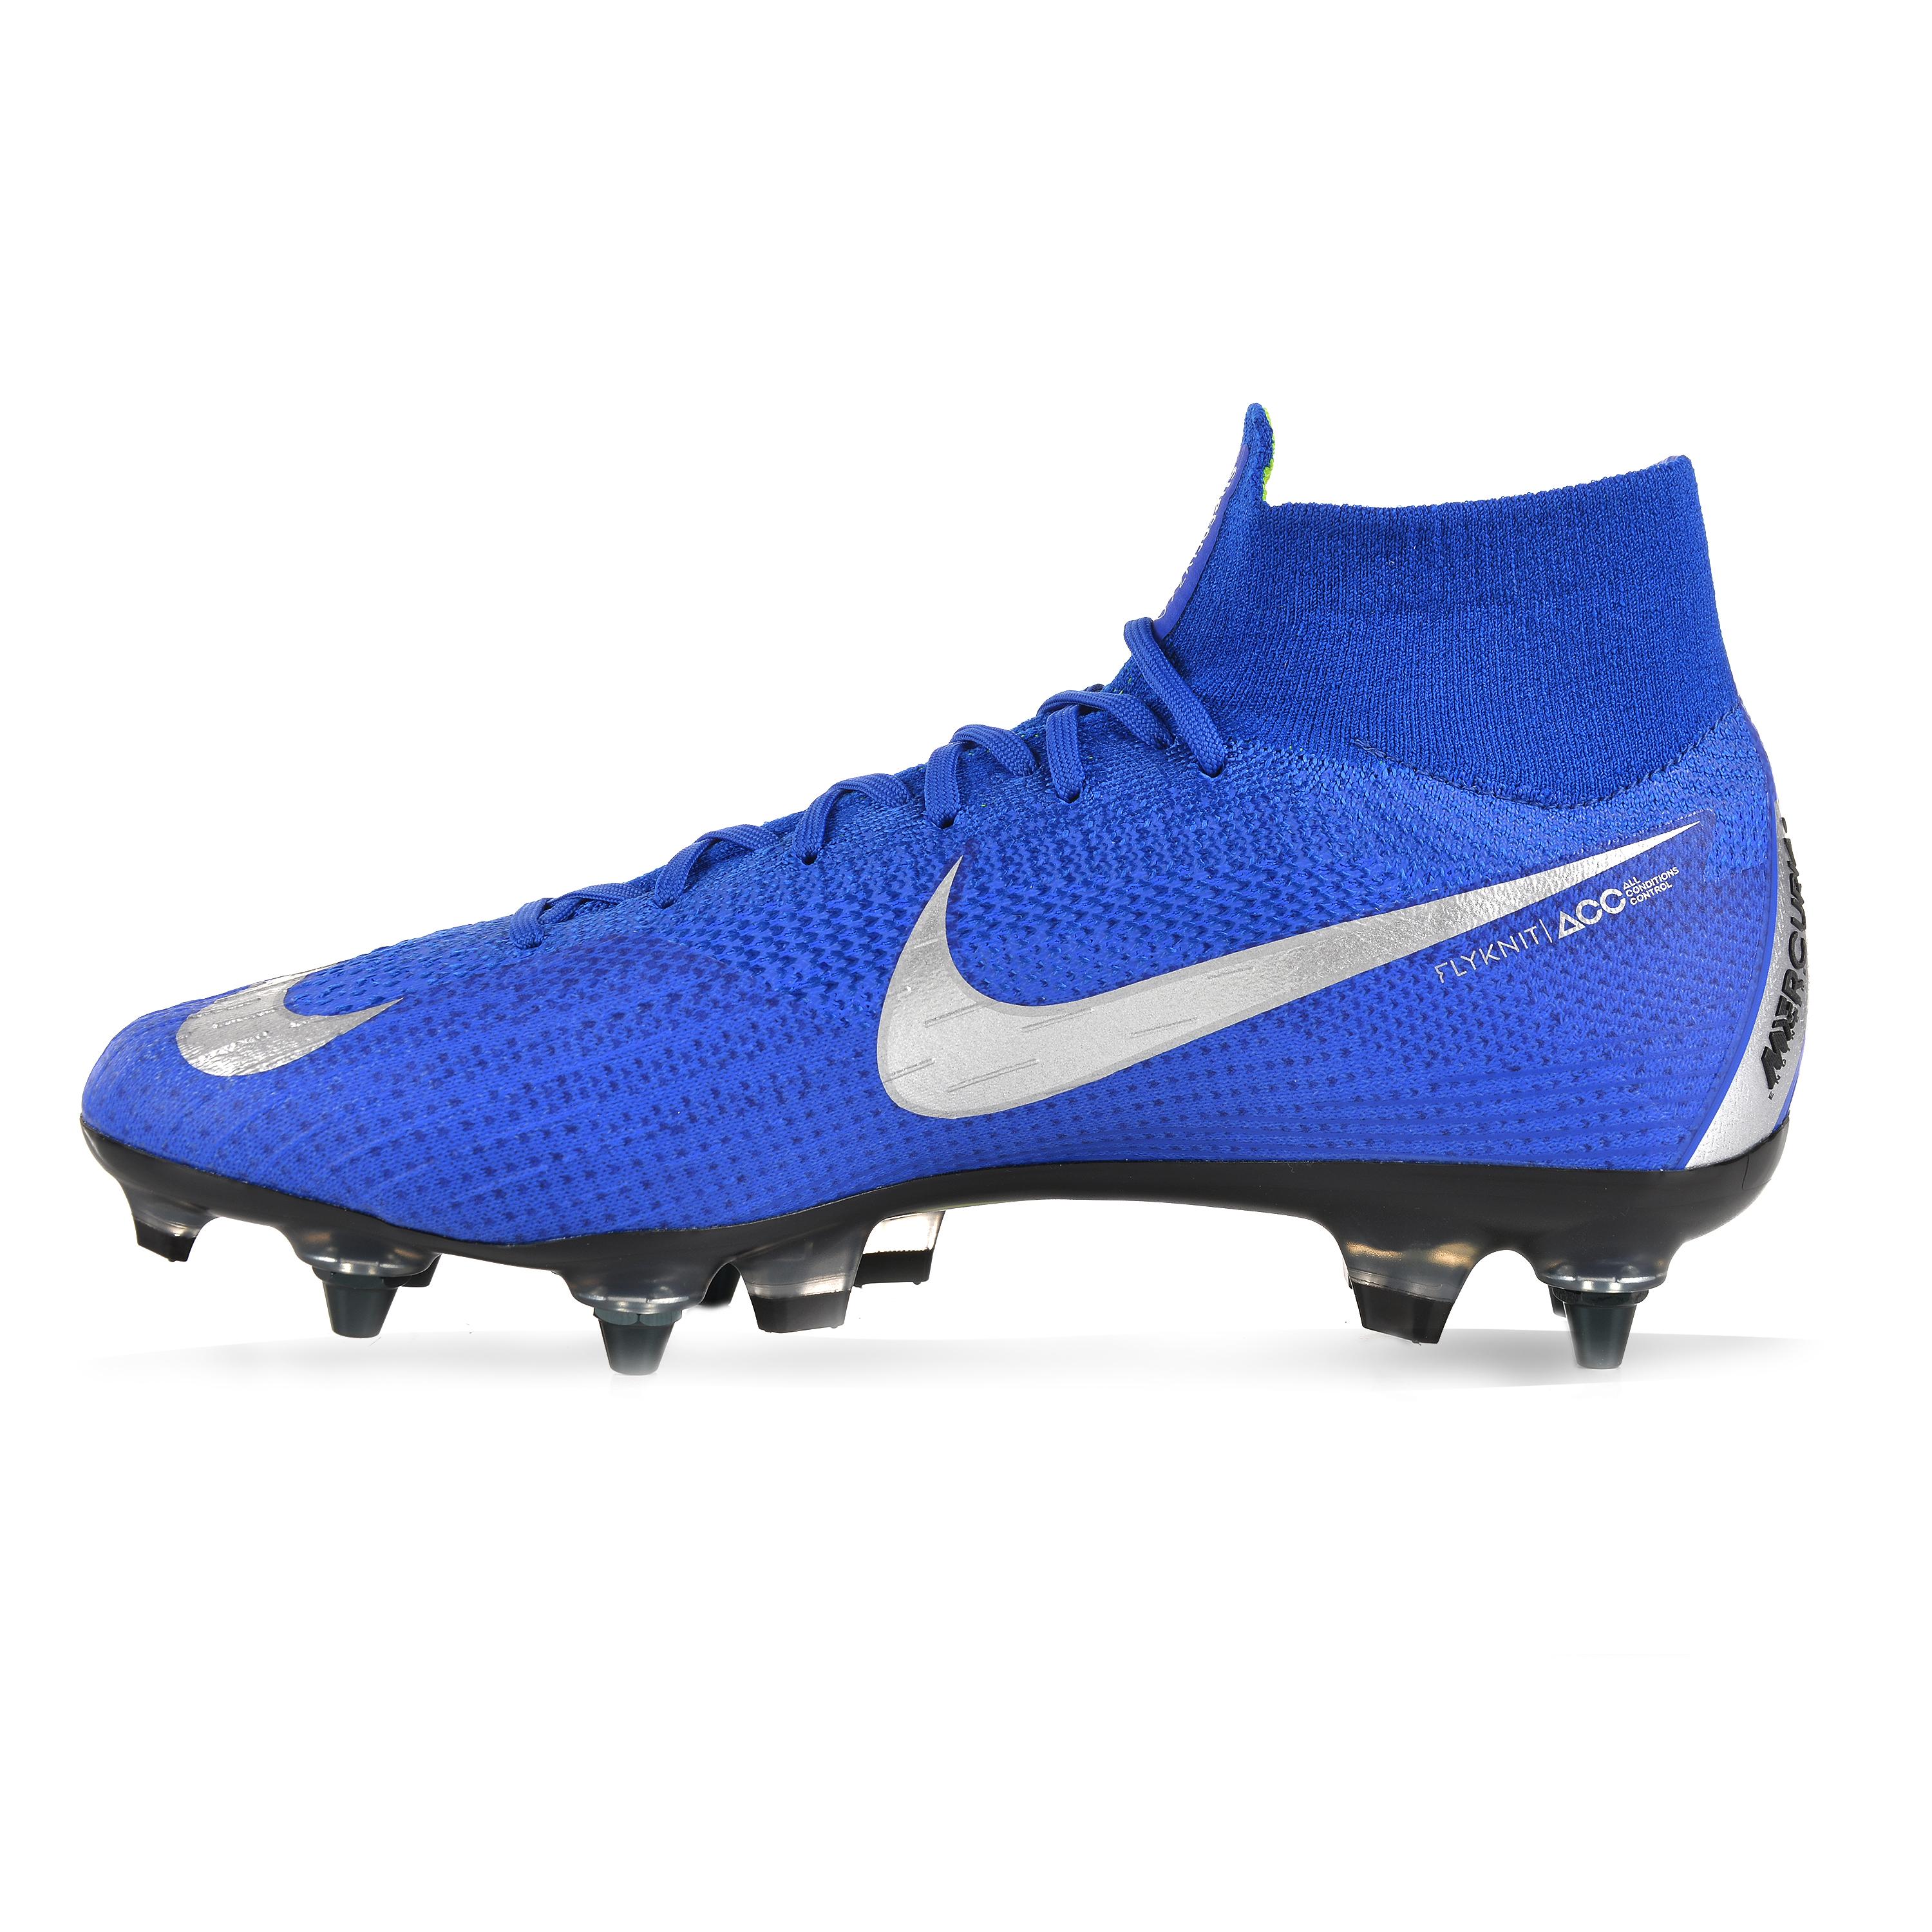 Nike Mercurial Vapor Superfly II Firm Ground Mens Boots